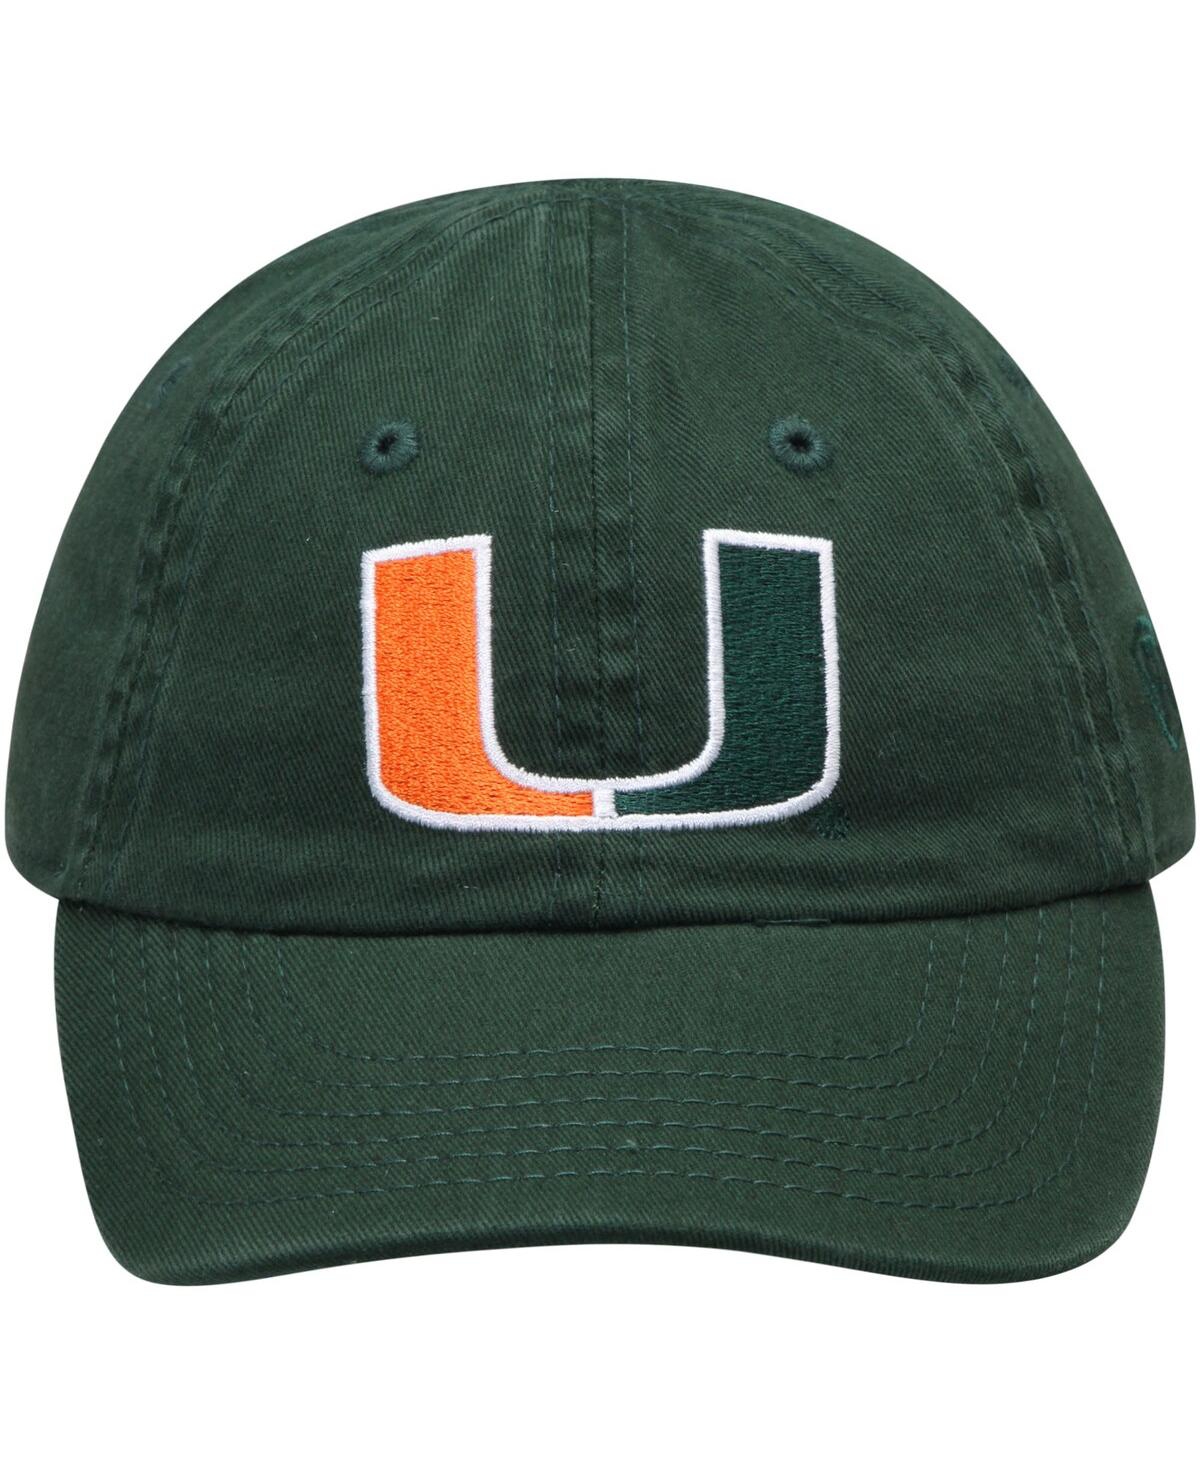 Shop Top Of The World Infant Unisex  Green Miami Hurricanes Mini Me Adjustable Hat